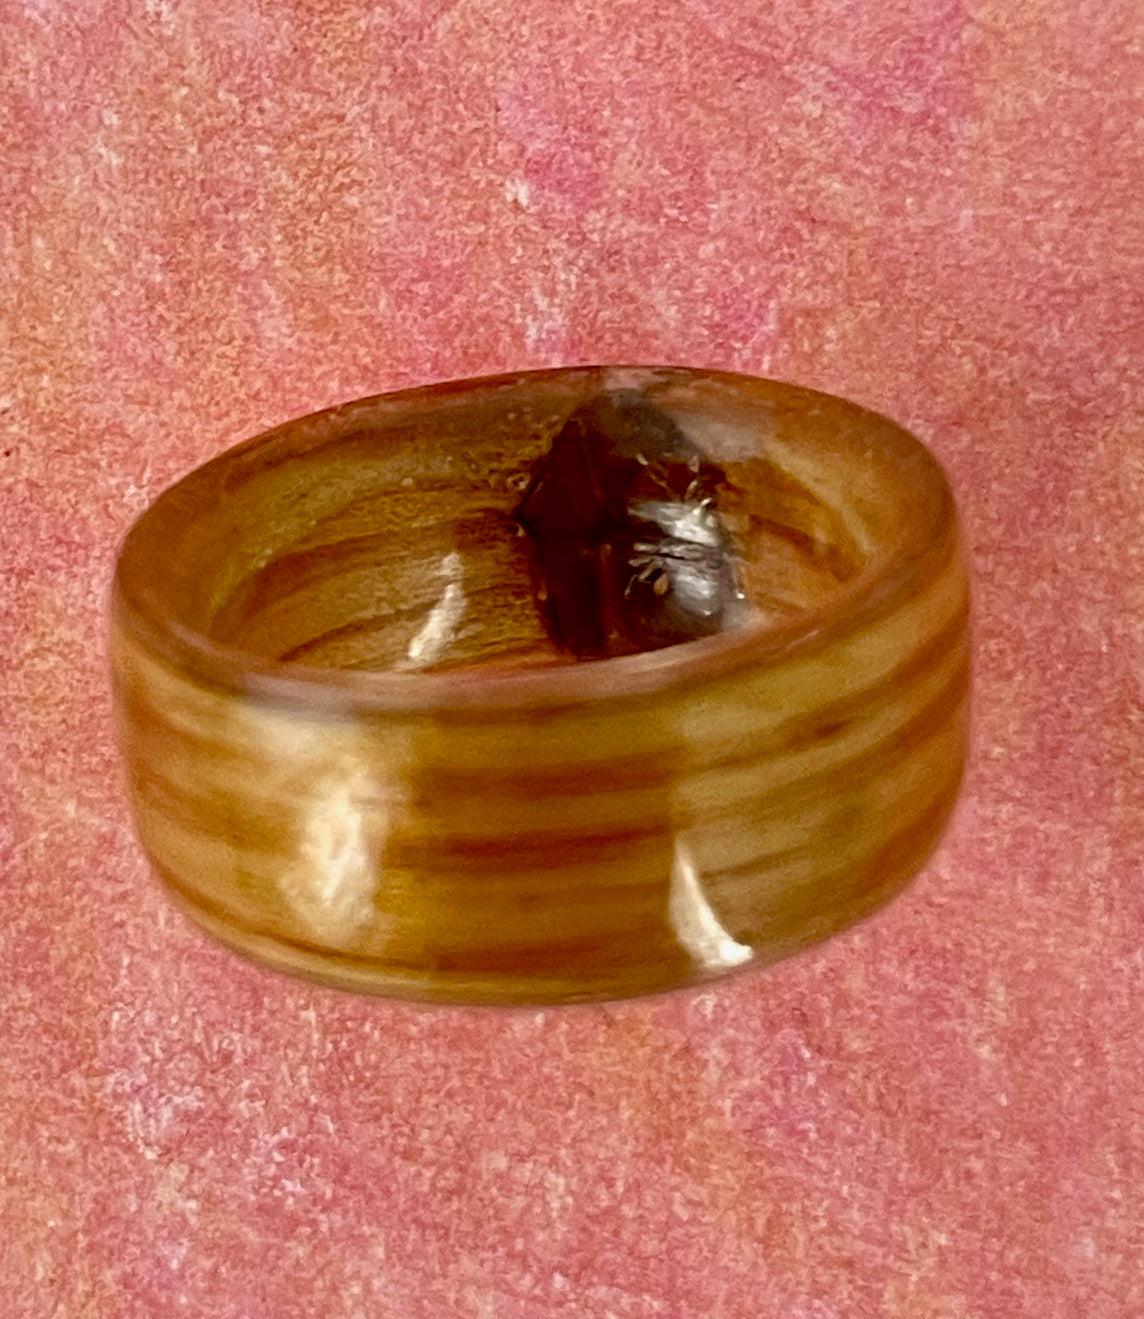 9 Lincoln St Reclaimed Wood and Boulder Opal Ring Size 8 1/2